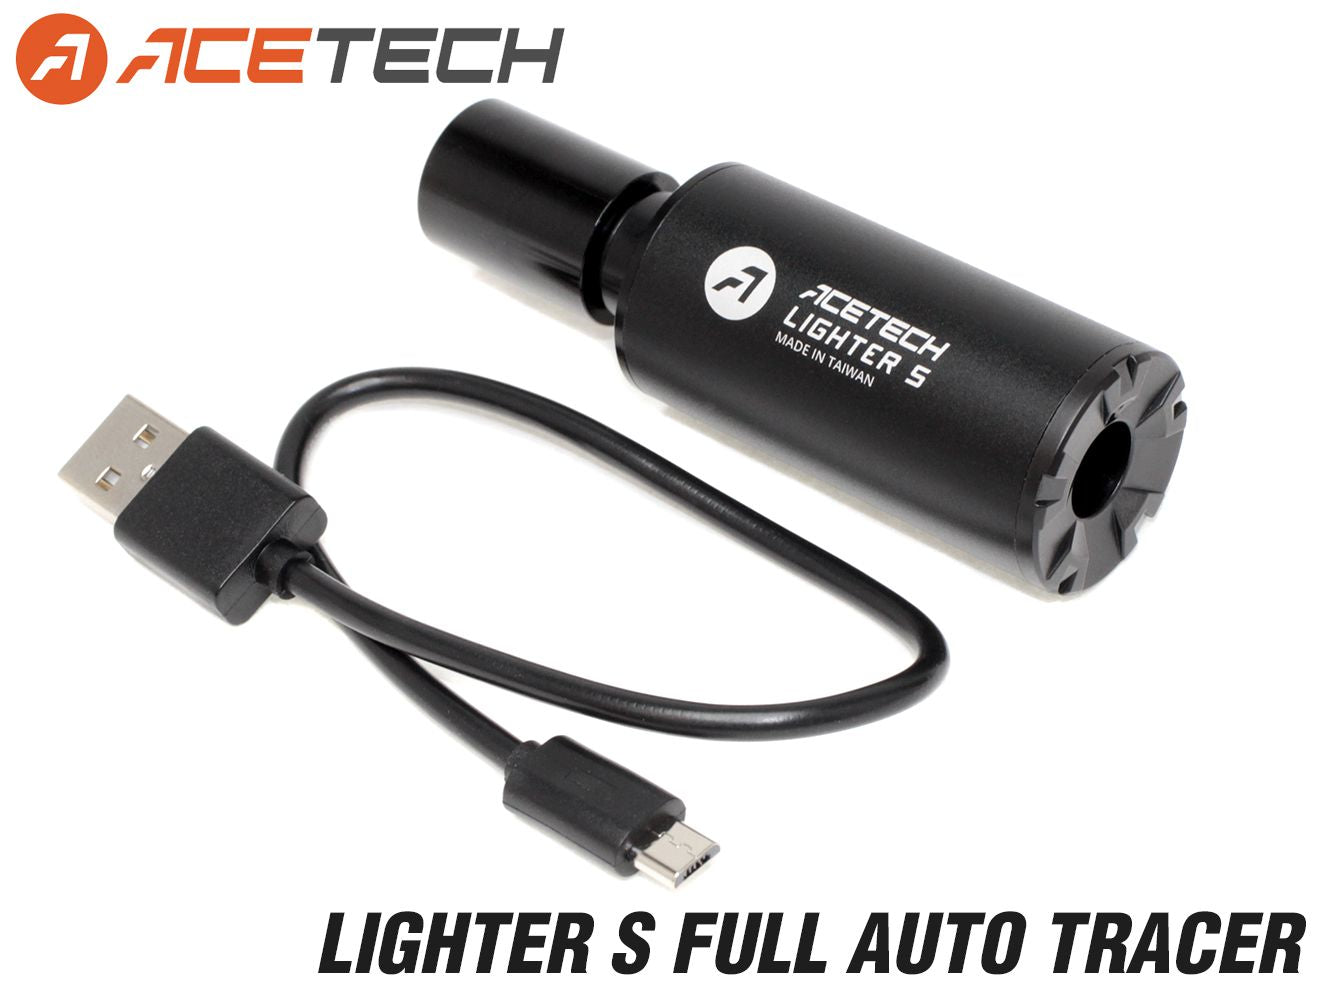 Acetech Lighter S Tracer - Ultimateairsoft fun guns cqb airsoft 